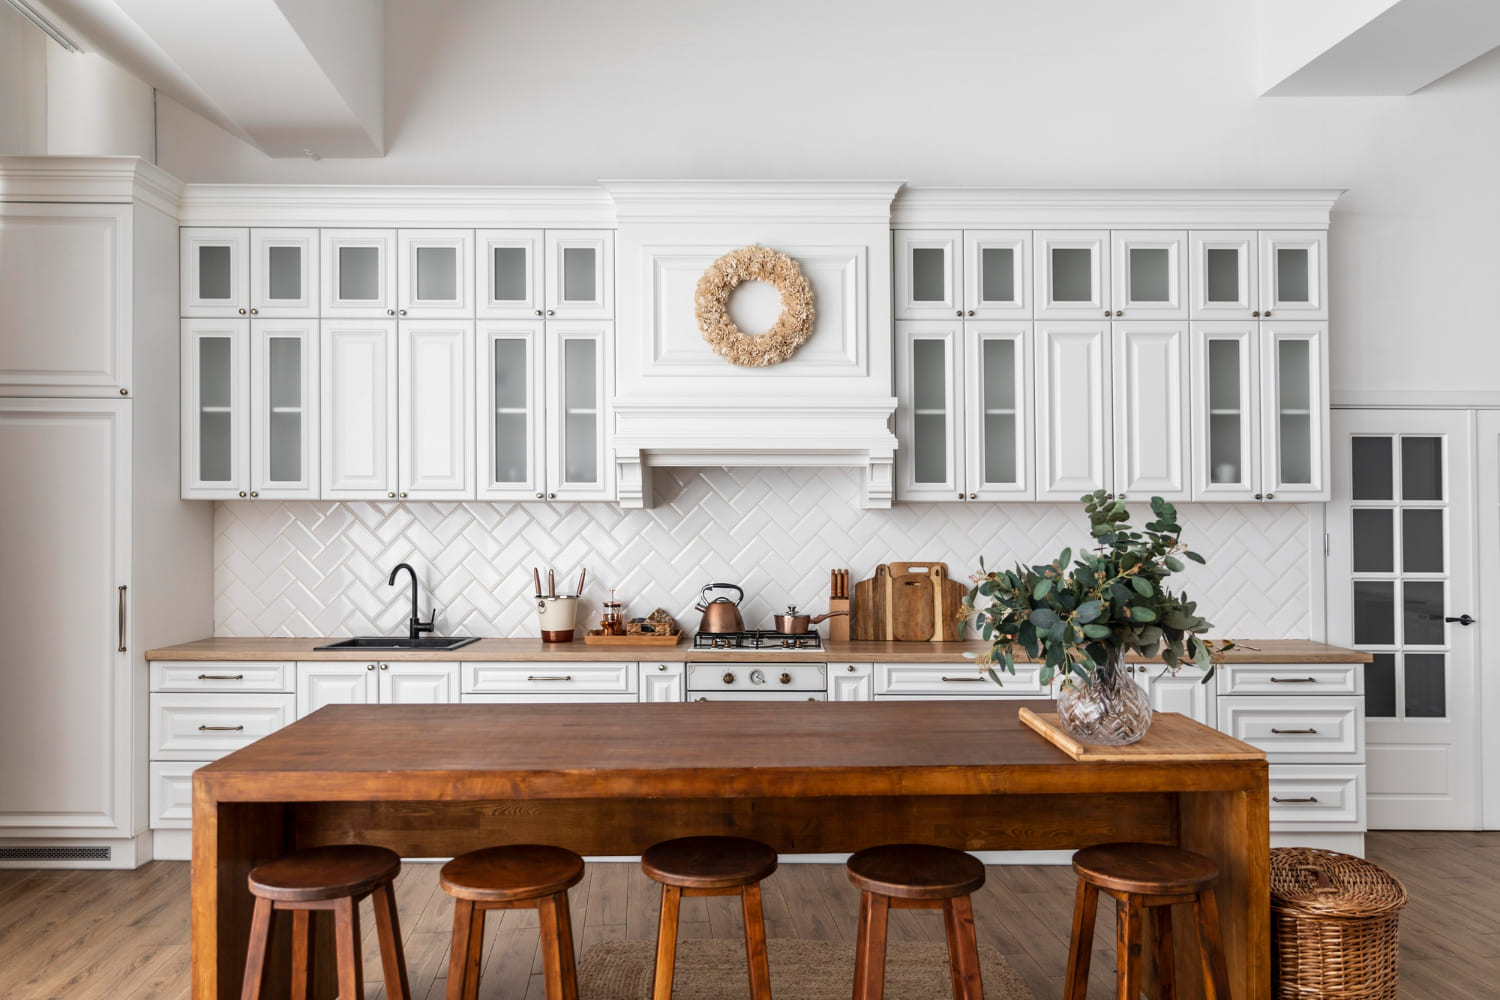 Experience the best kitchen interior designs with a rustic charm of wooden dining table and stools, complementing the contemporary white-themed straight kitchen. Perfect blend of style and functionality .